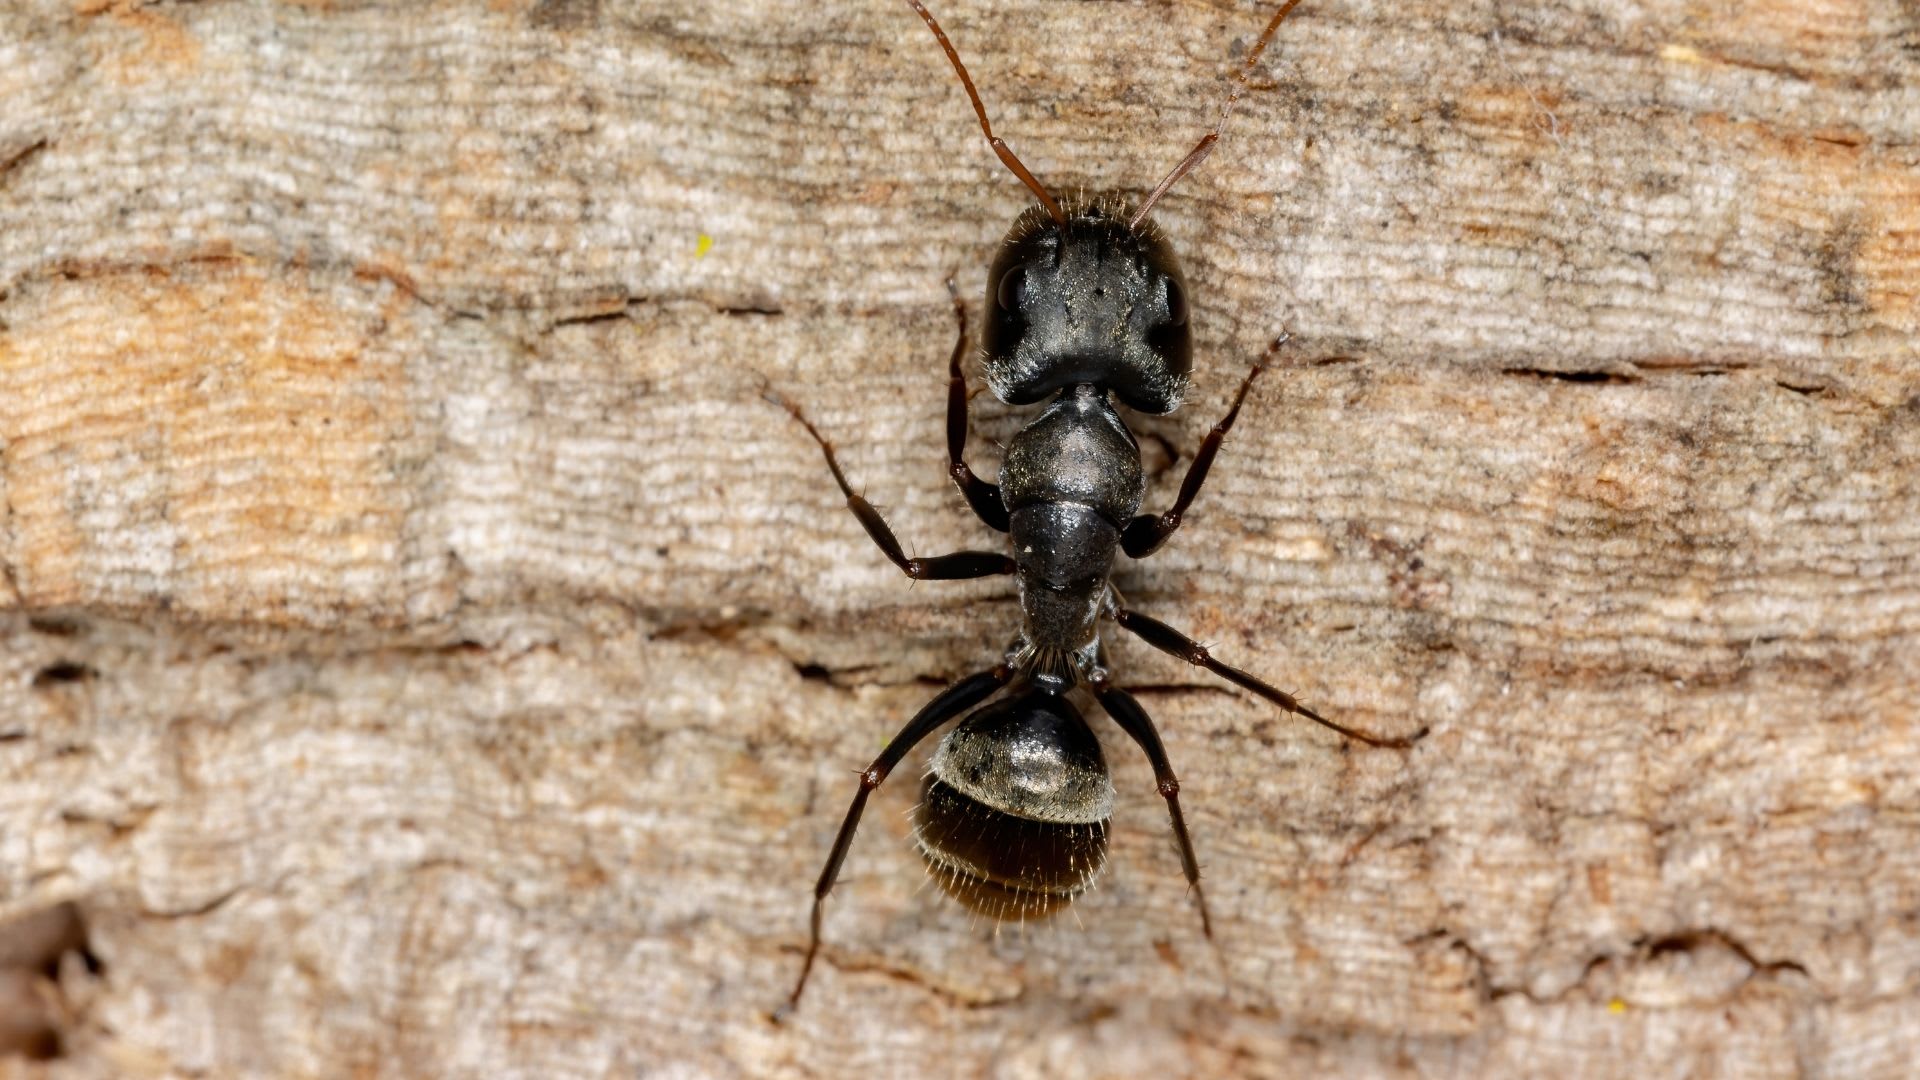 While these ants don’t technically eat wood, they still can destroy wood structures if not taken care of.